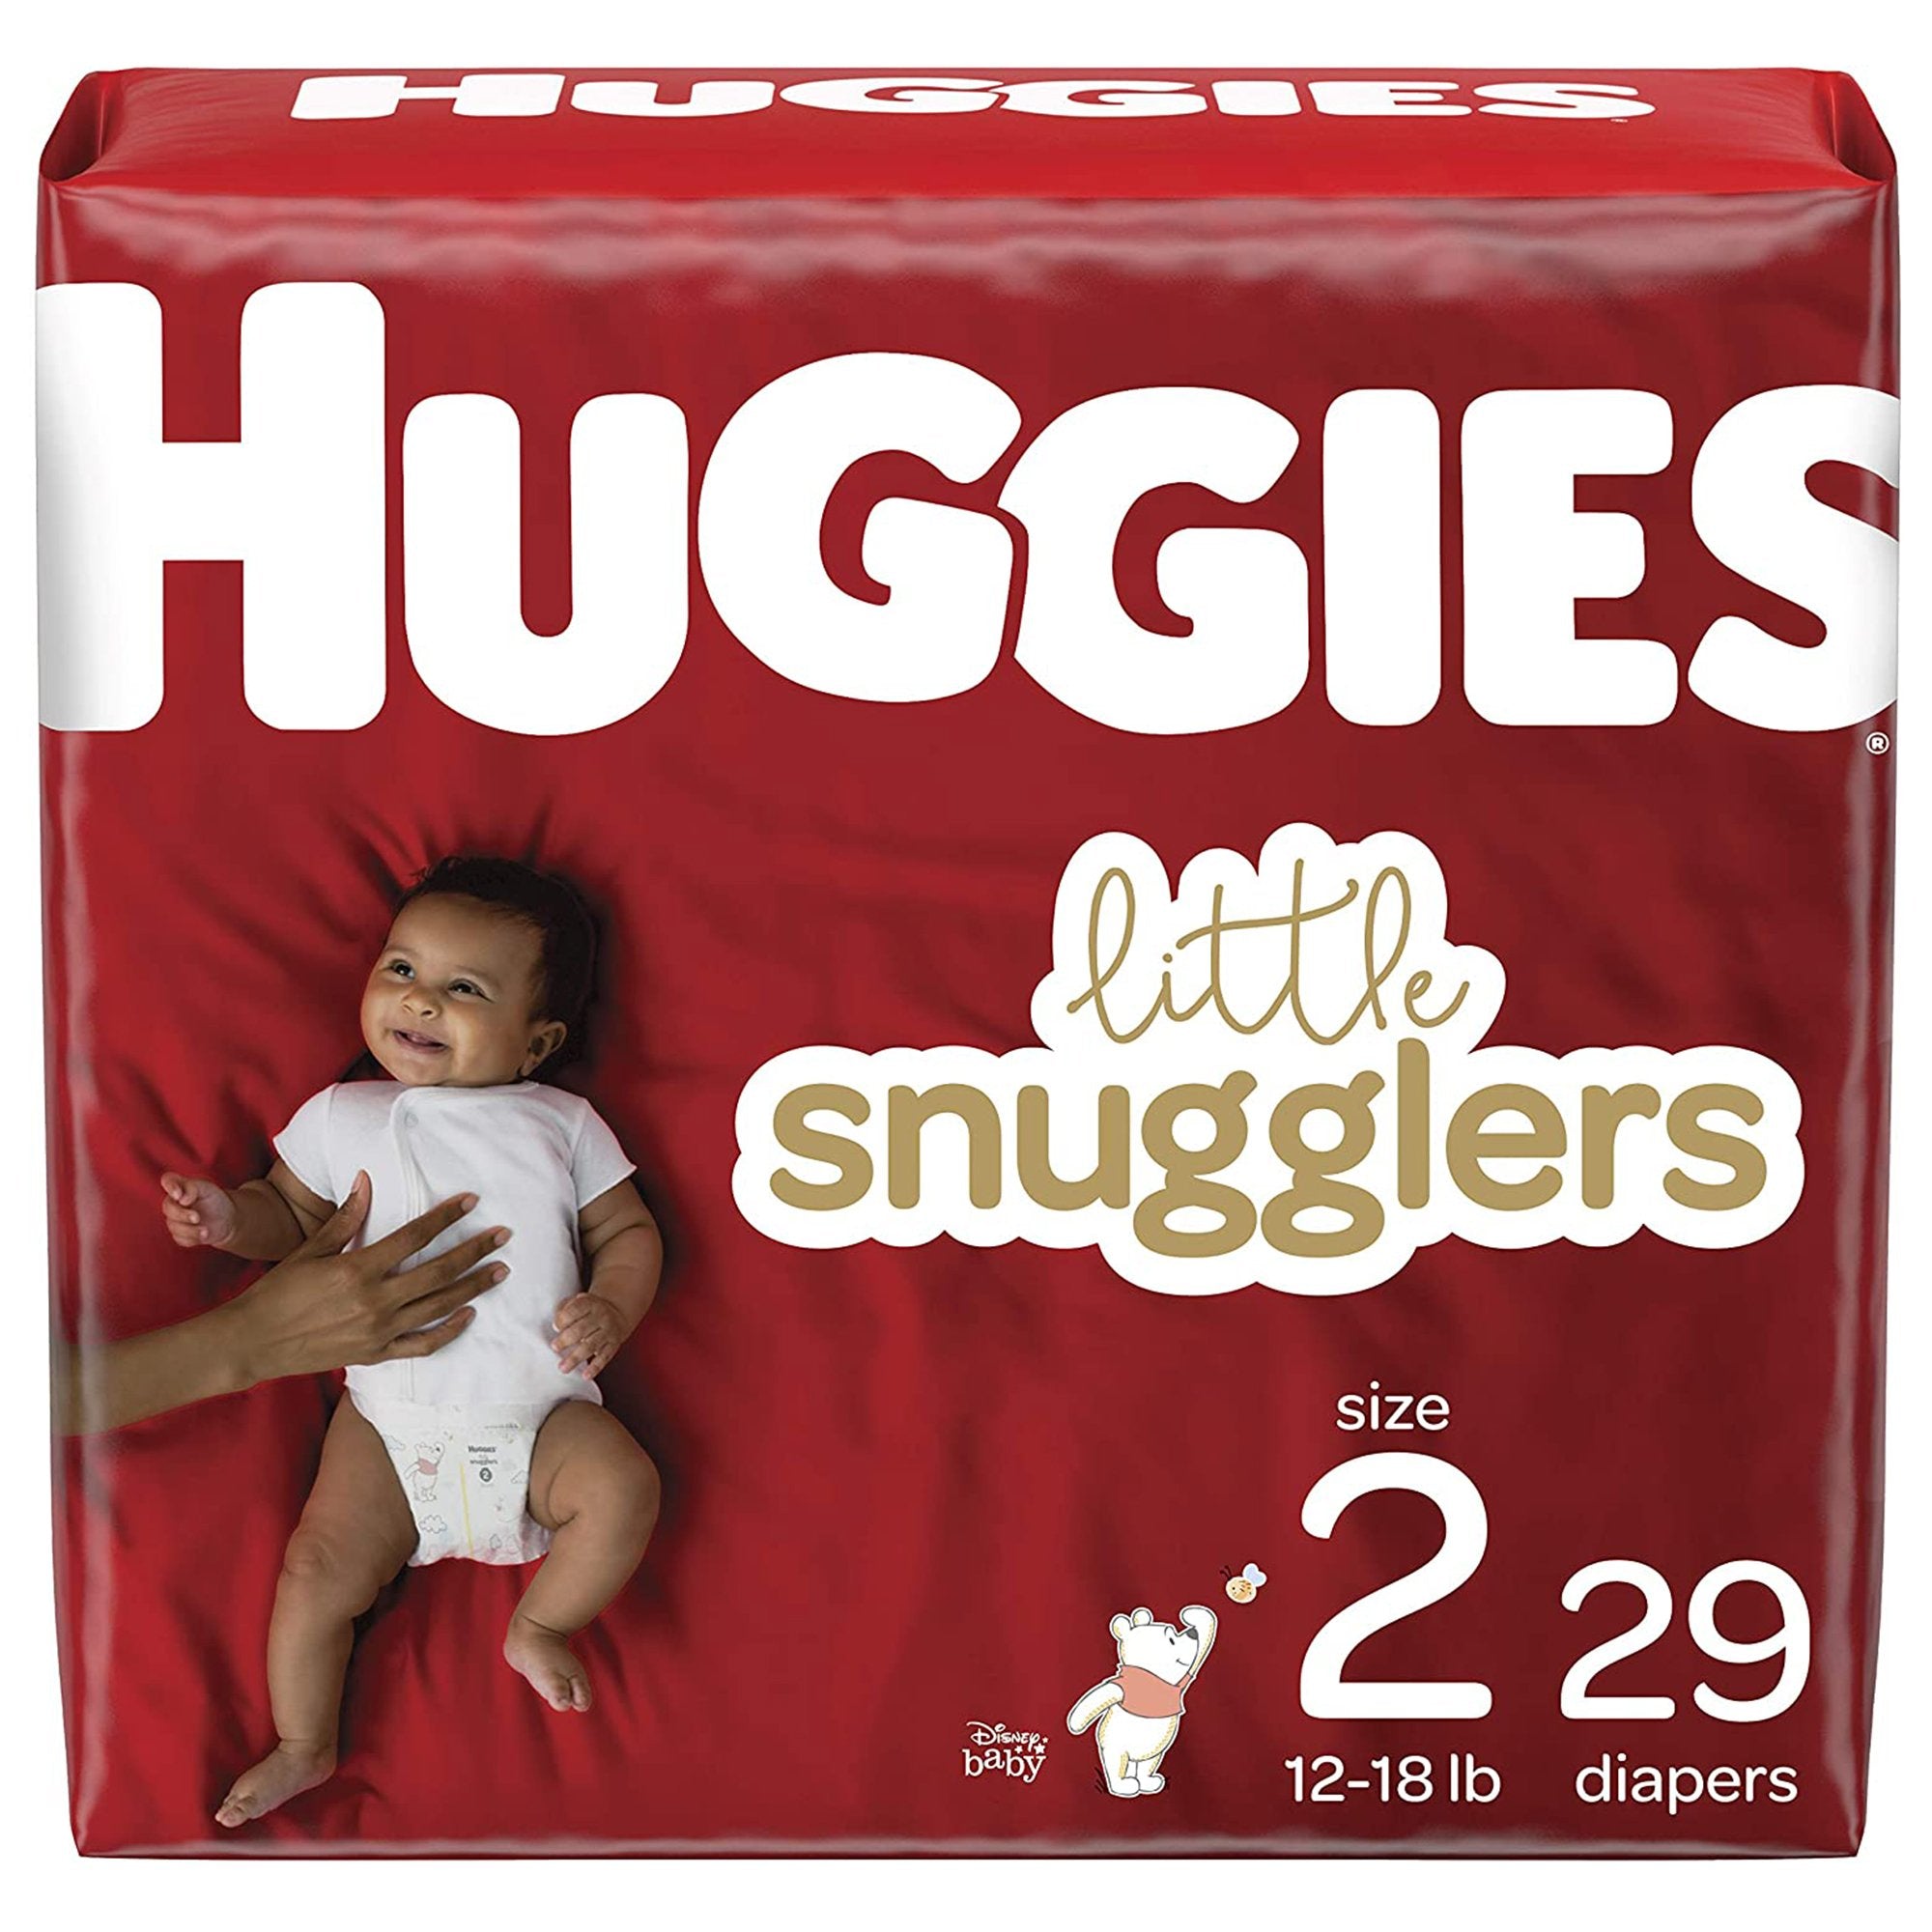 Unisex Baby Diaper Huggies Little Snugglers Size 2 Disposable Moderate Absorbency